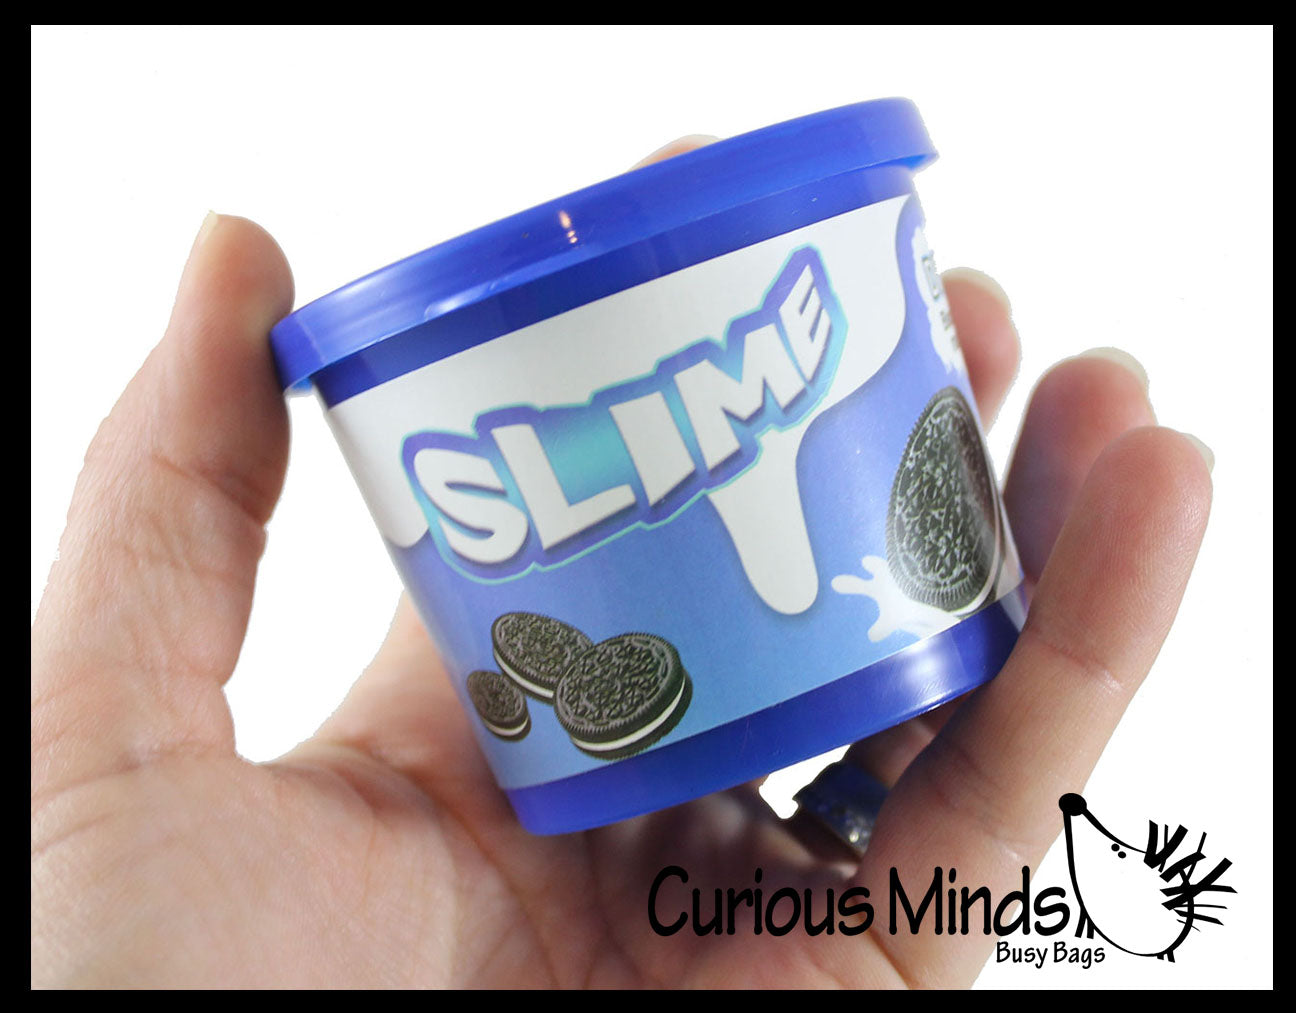 LAST CHANCE - LIMITED STOCK -  - SALE - Cookies & Cream Slime -  Stretchy, Gooey, Drippy Slime with Cookie Mix-Ins - Putty - Goo